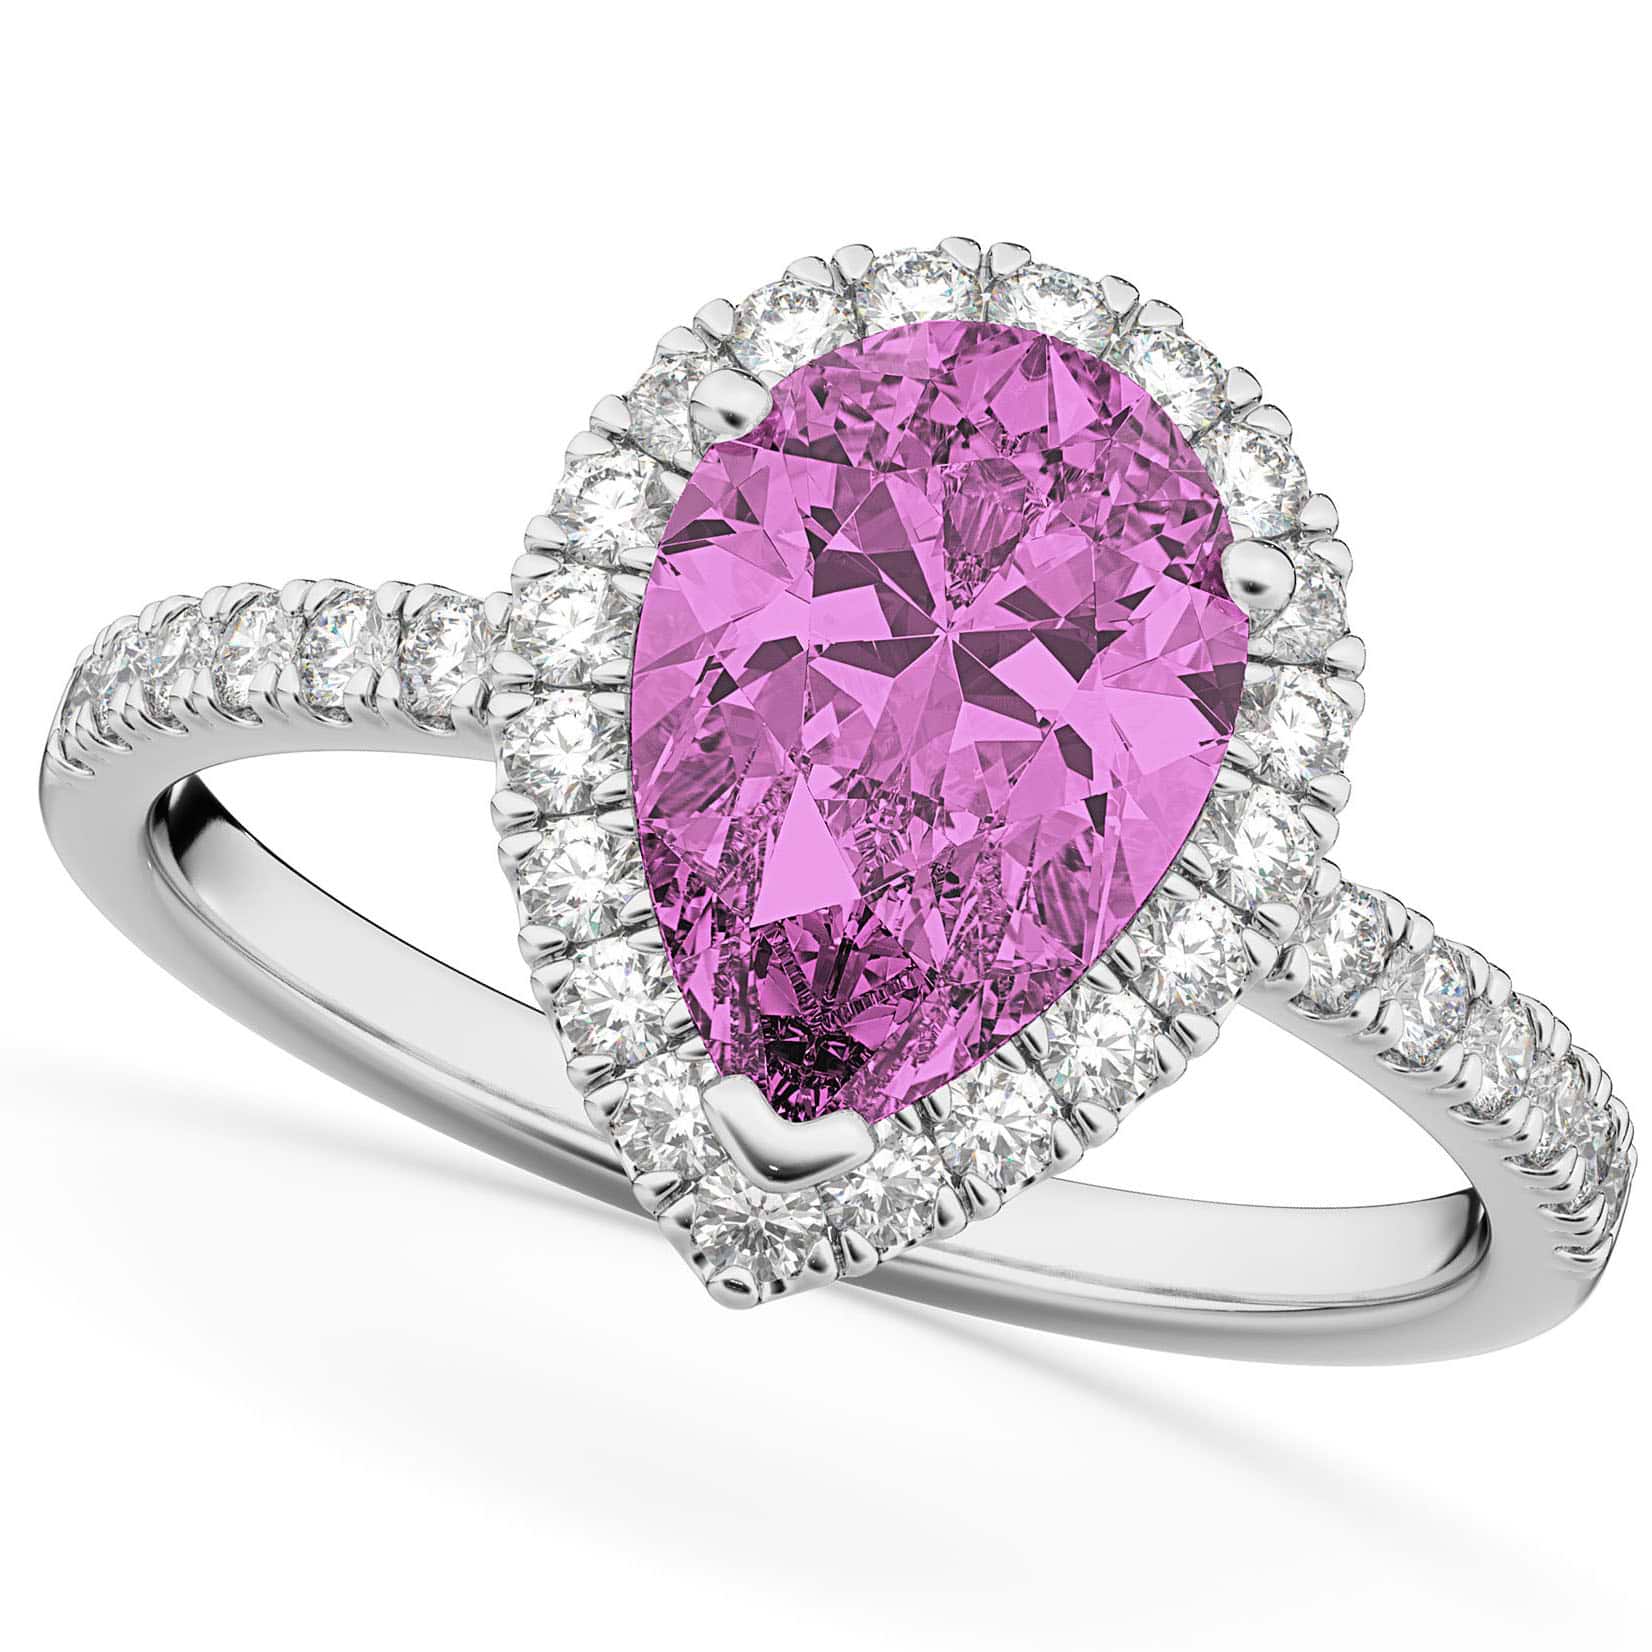 Pear Cut Halo Pink Sapphire & Diamond Engagement Ring 14K White Gold 3.01ct